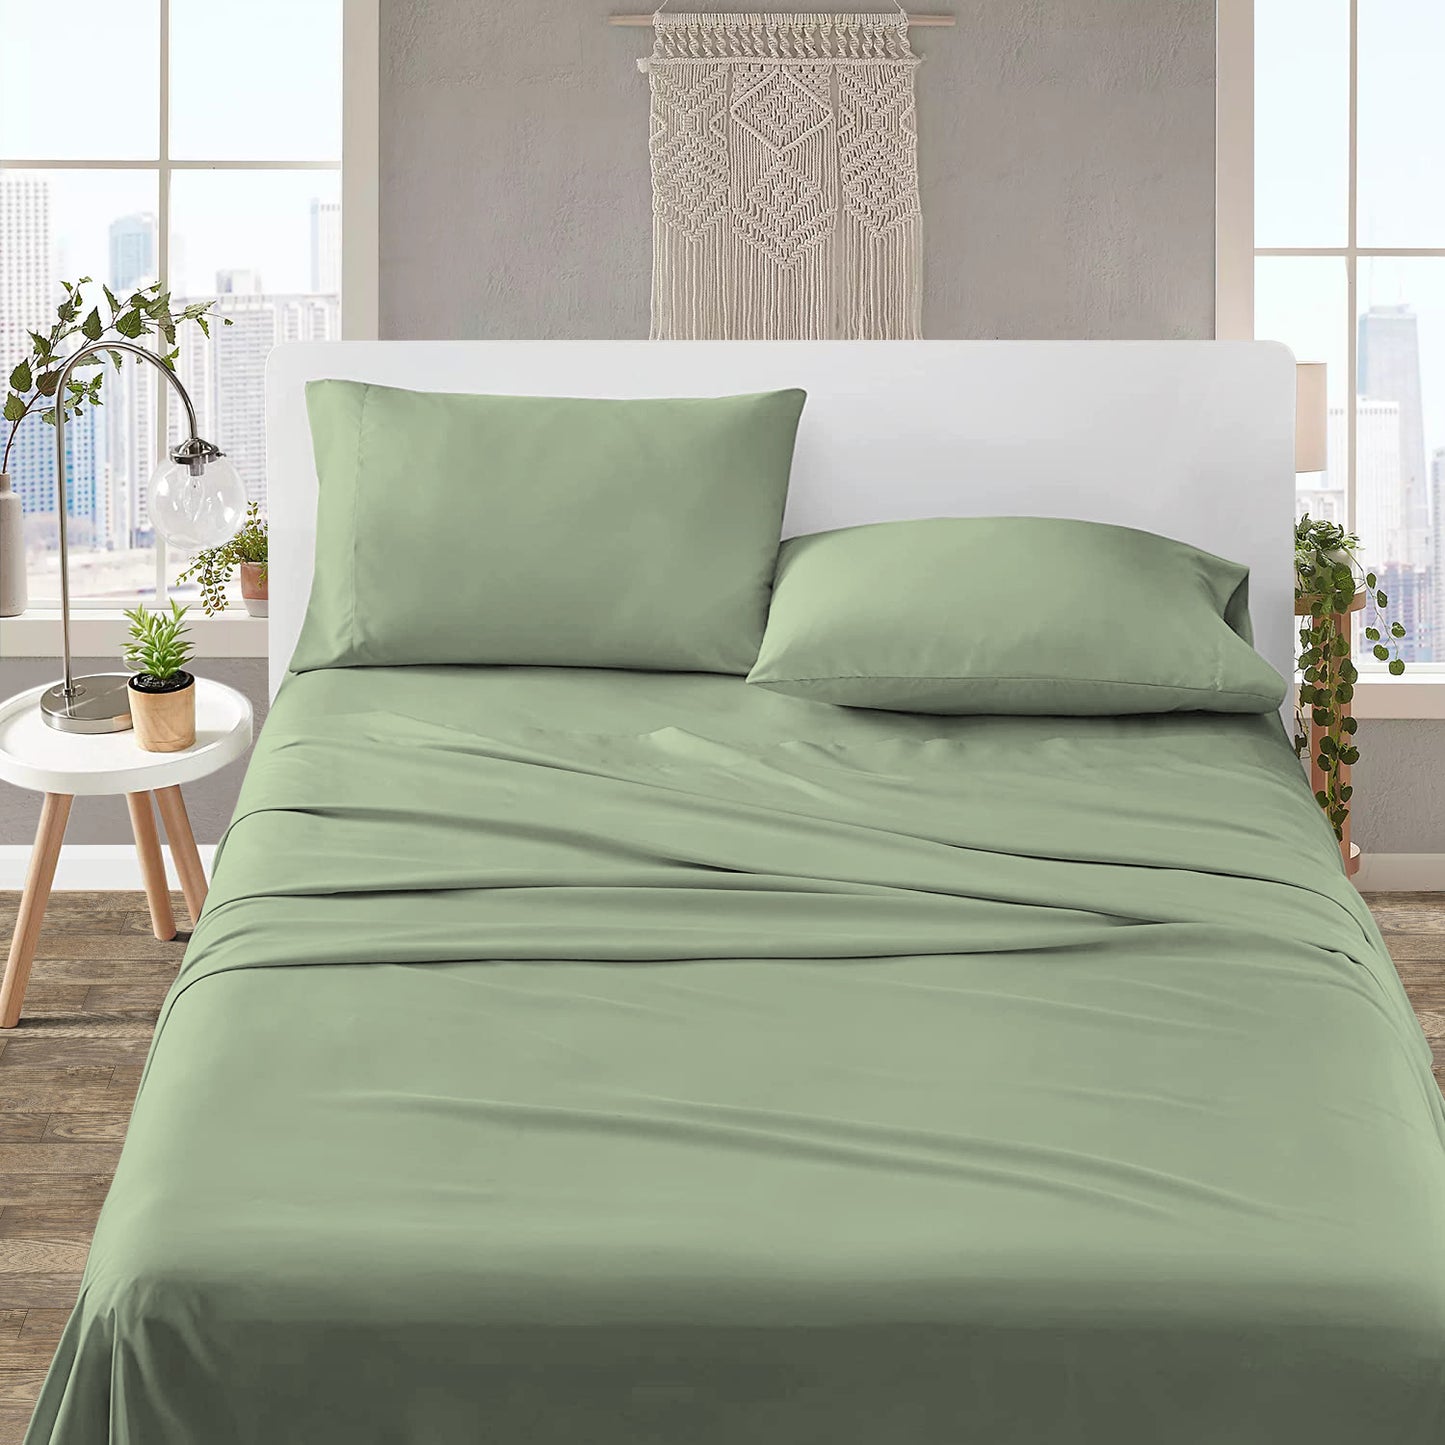 Moss Bed Sheets  Available In All Sizes – Cozy bedding